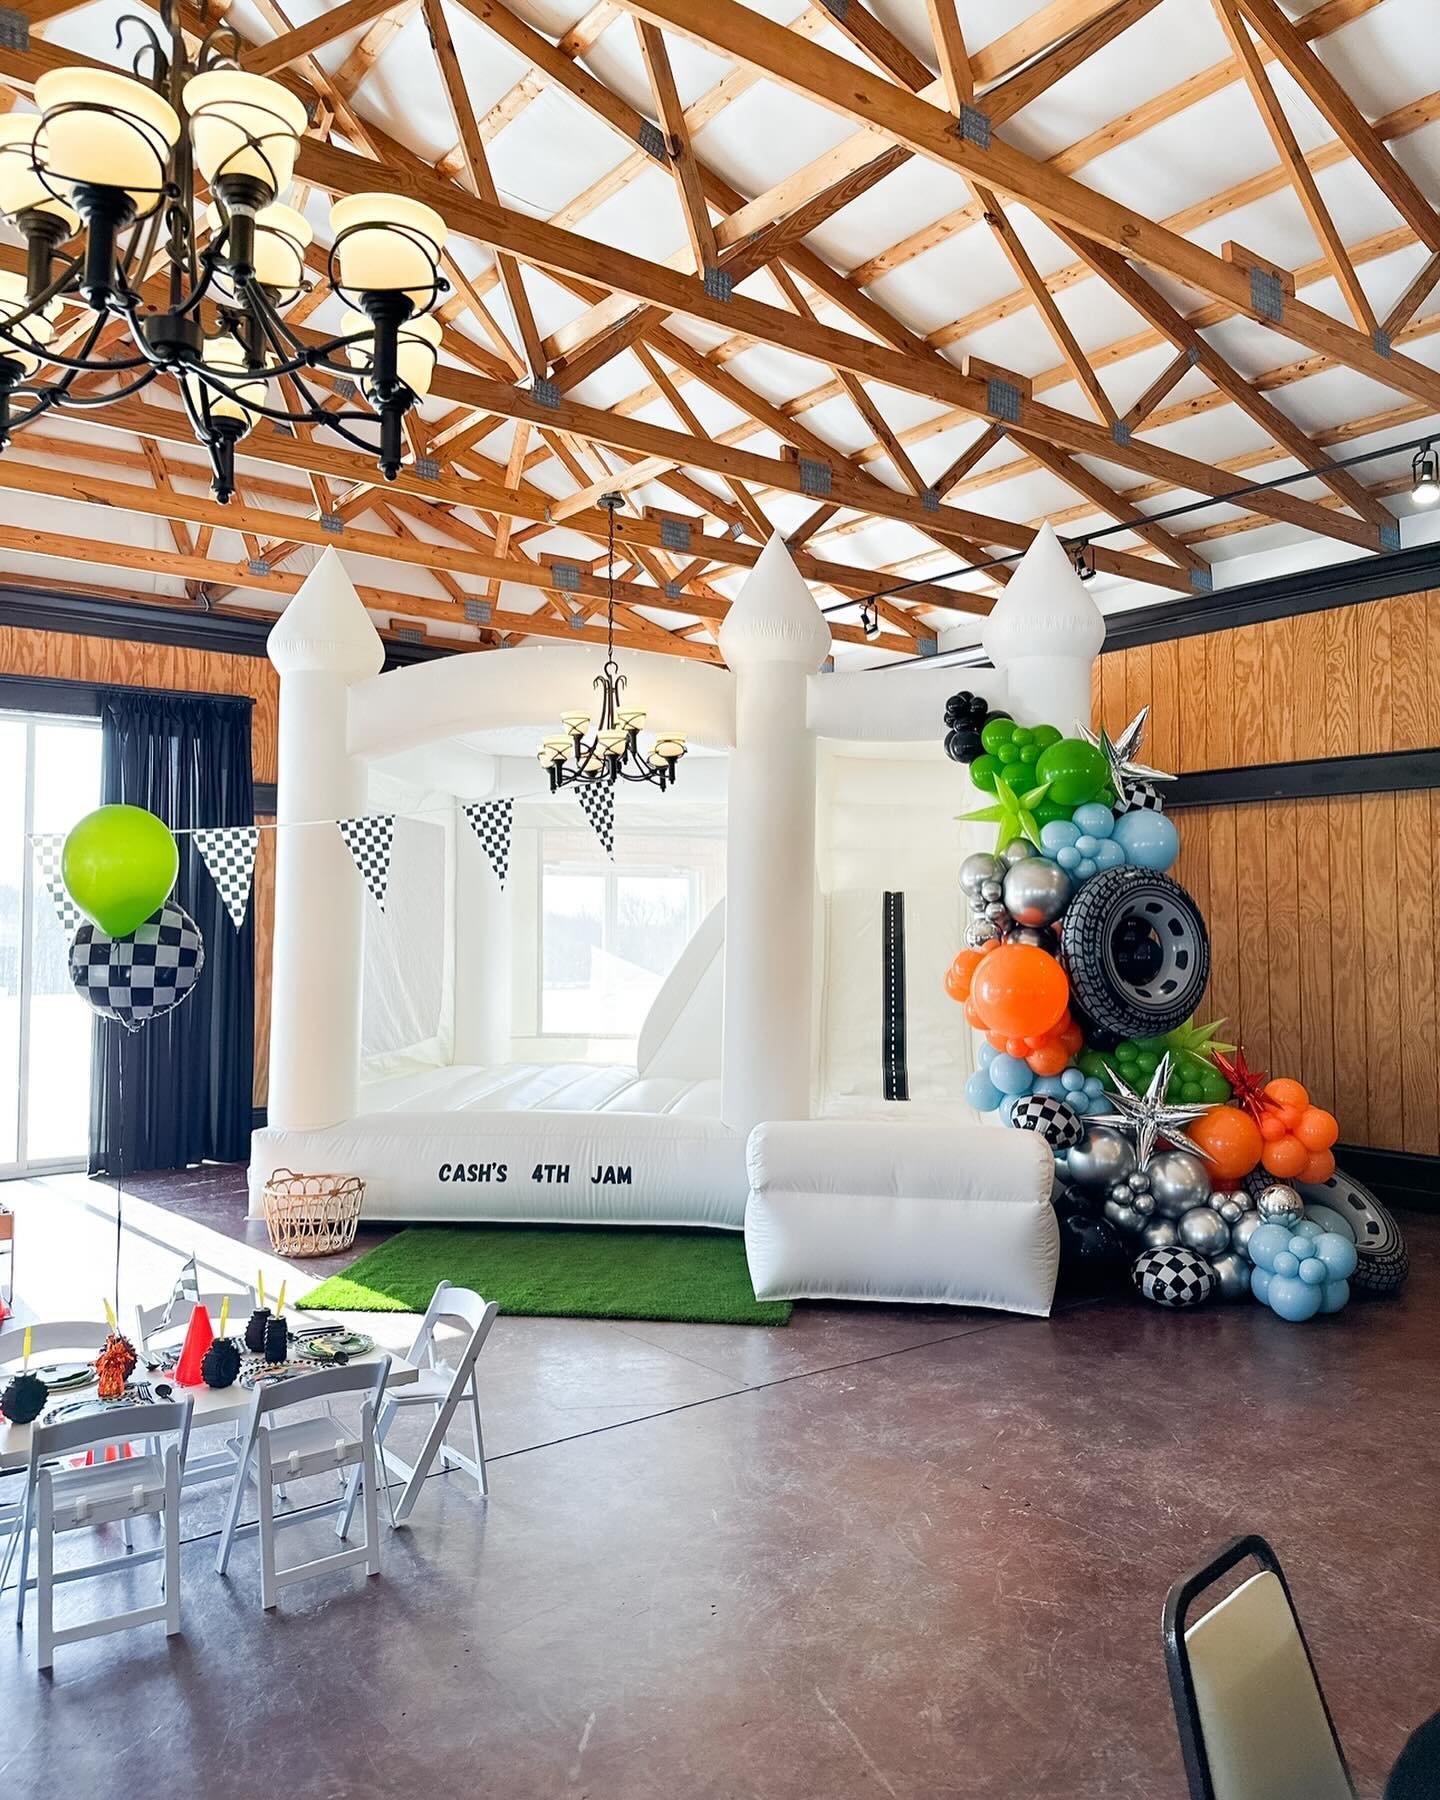 For the little monster truck lovers 🏎️ we can make that happen too!! VROOM, Cash&rsquo;s BIRTHDAY BASH! 

@inflatelouisville